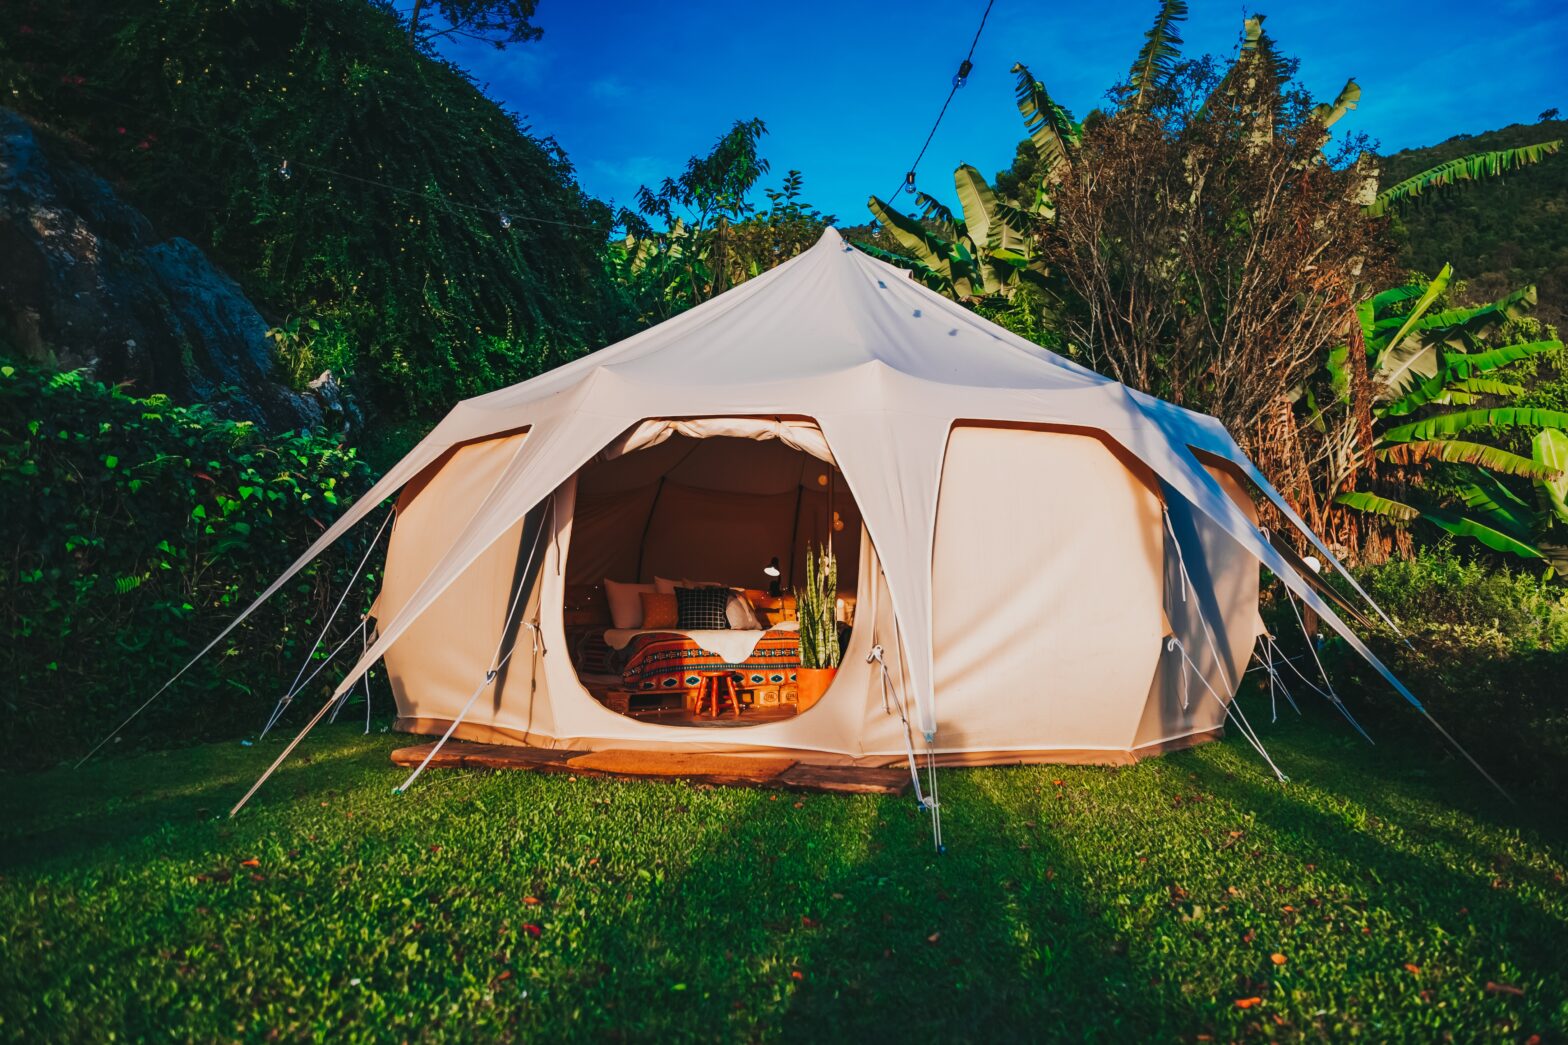 Camping Hacks To Use This Summer